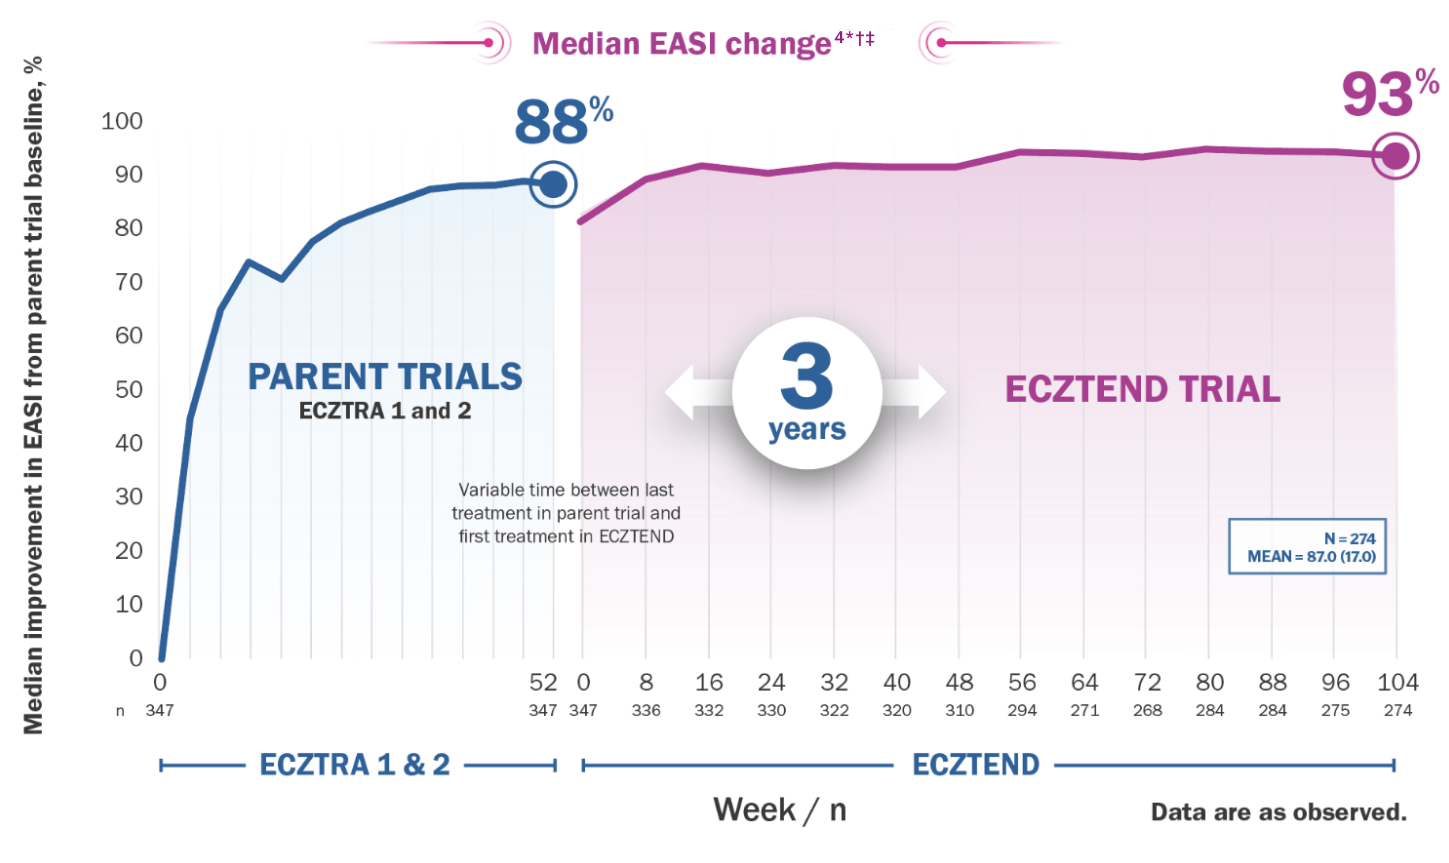 Chart: median EASI change from ECZTRA 1 & 2 through the ECZTEND OLE trial